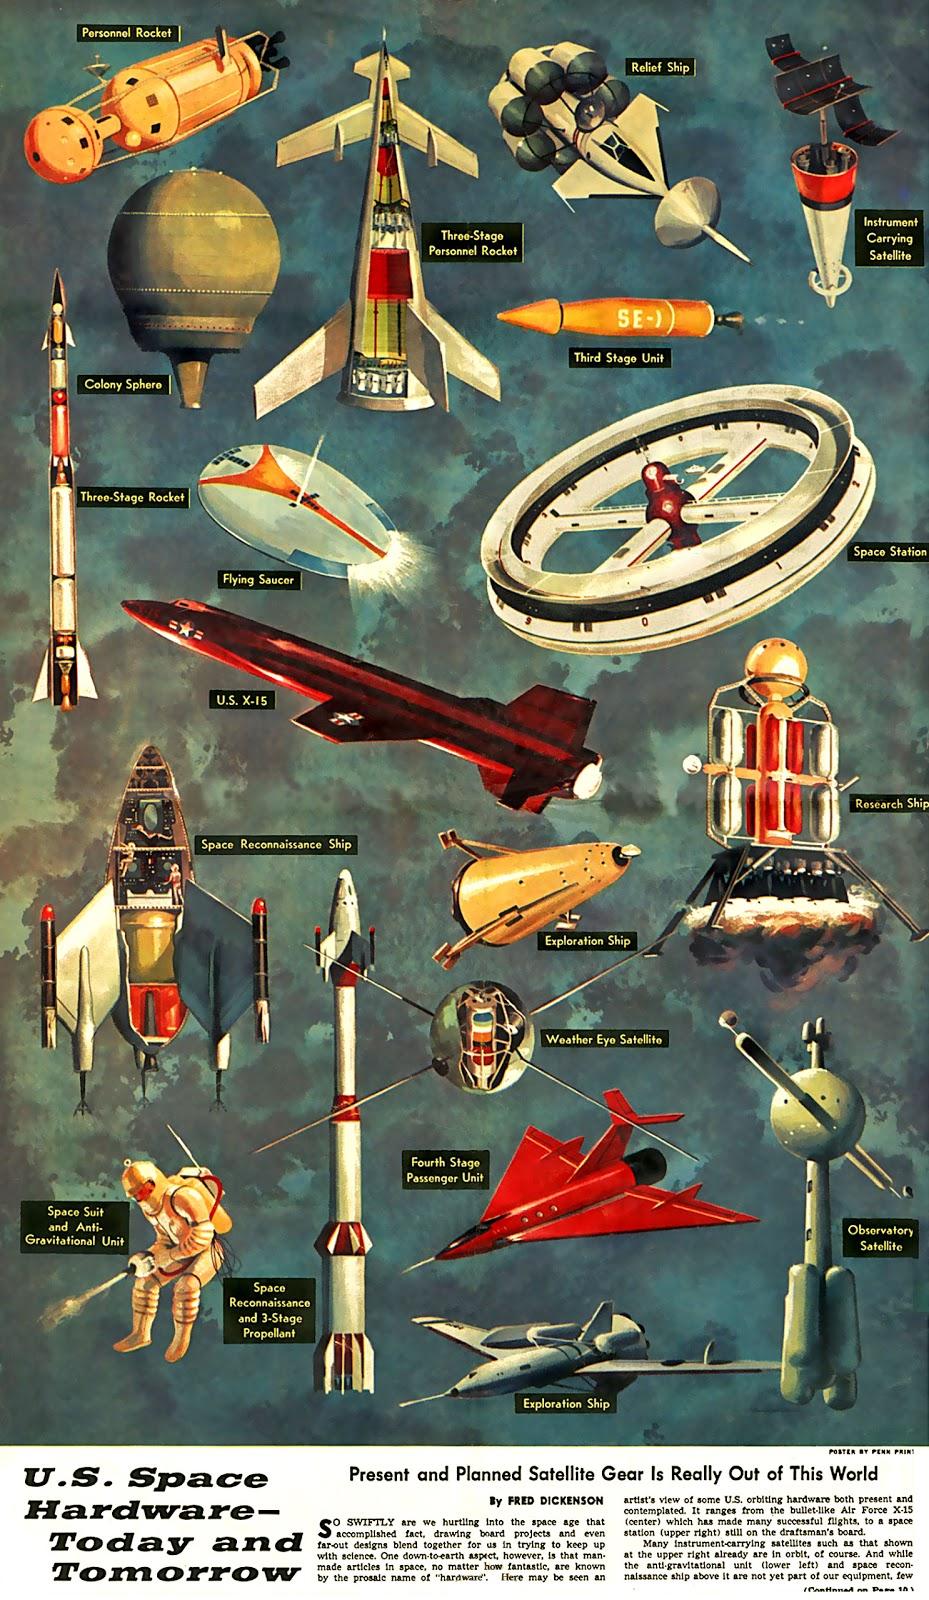 1963 U.S. Space Hardware - Today and Tomorrow from New York Mirror Magazine.jpg